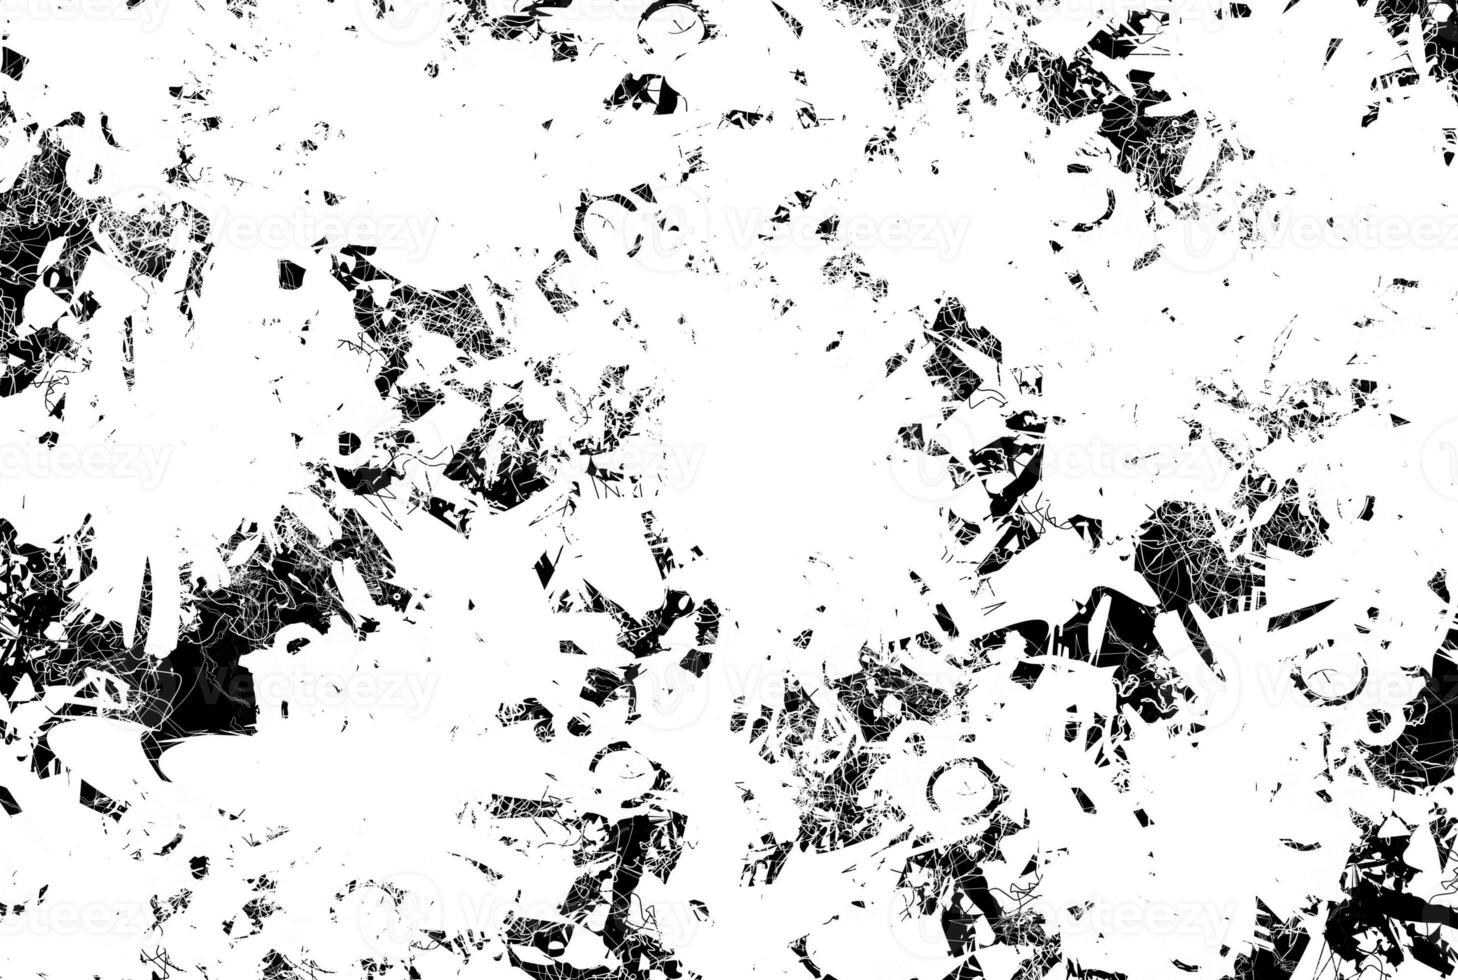 Monochrome abstract background cracked chalk texture smudge pattern photo